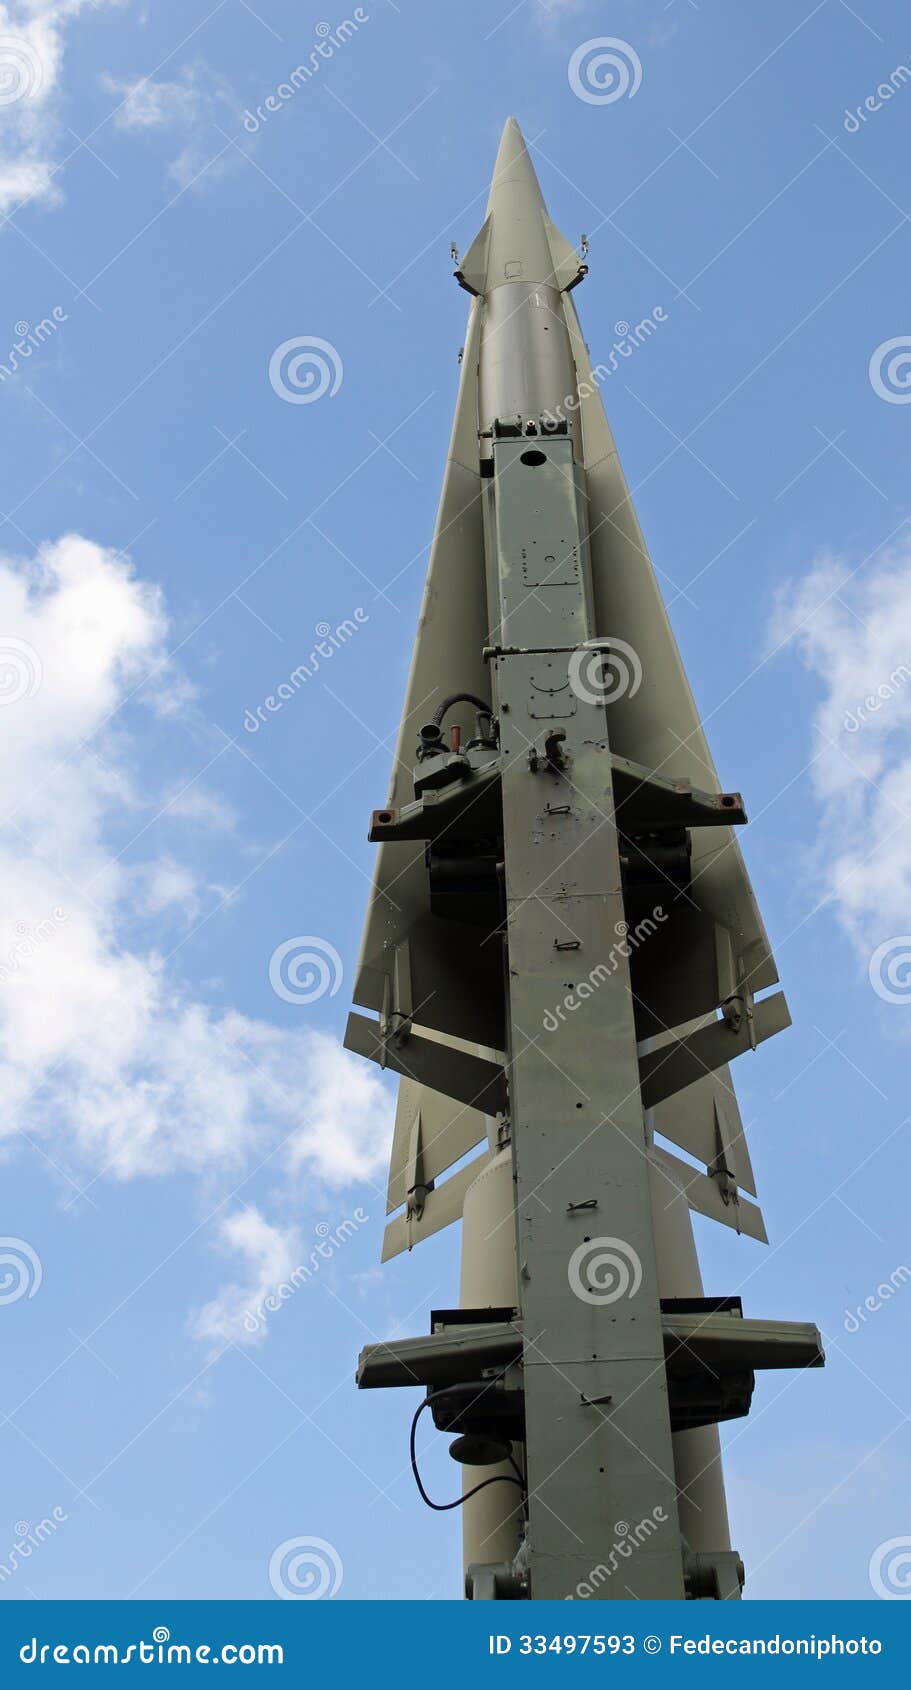 rocket with military explosive warhead for the war 4